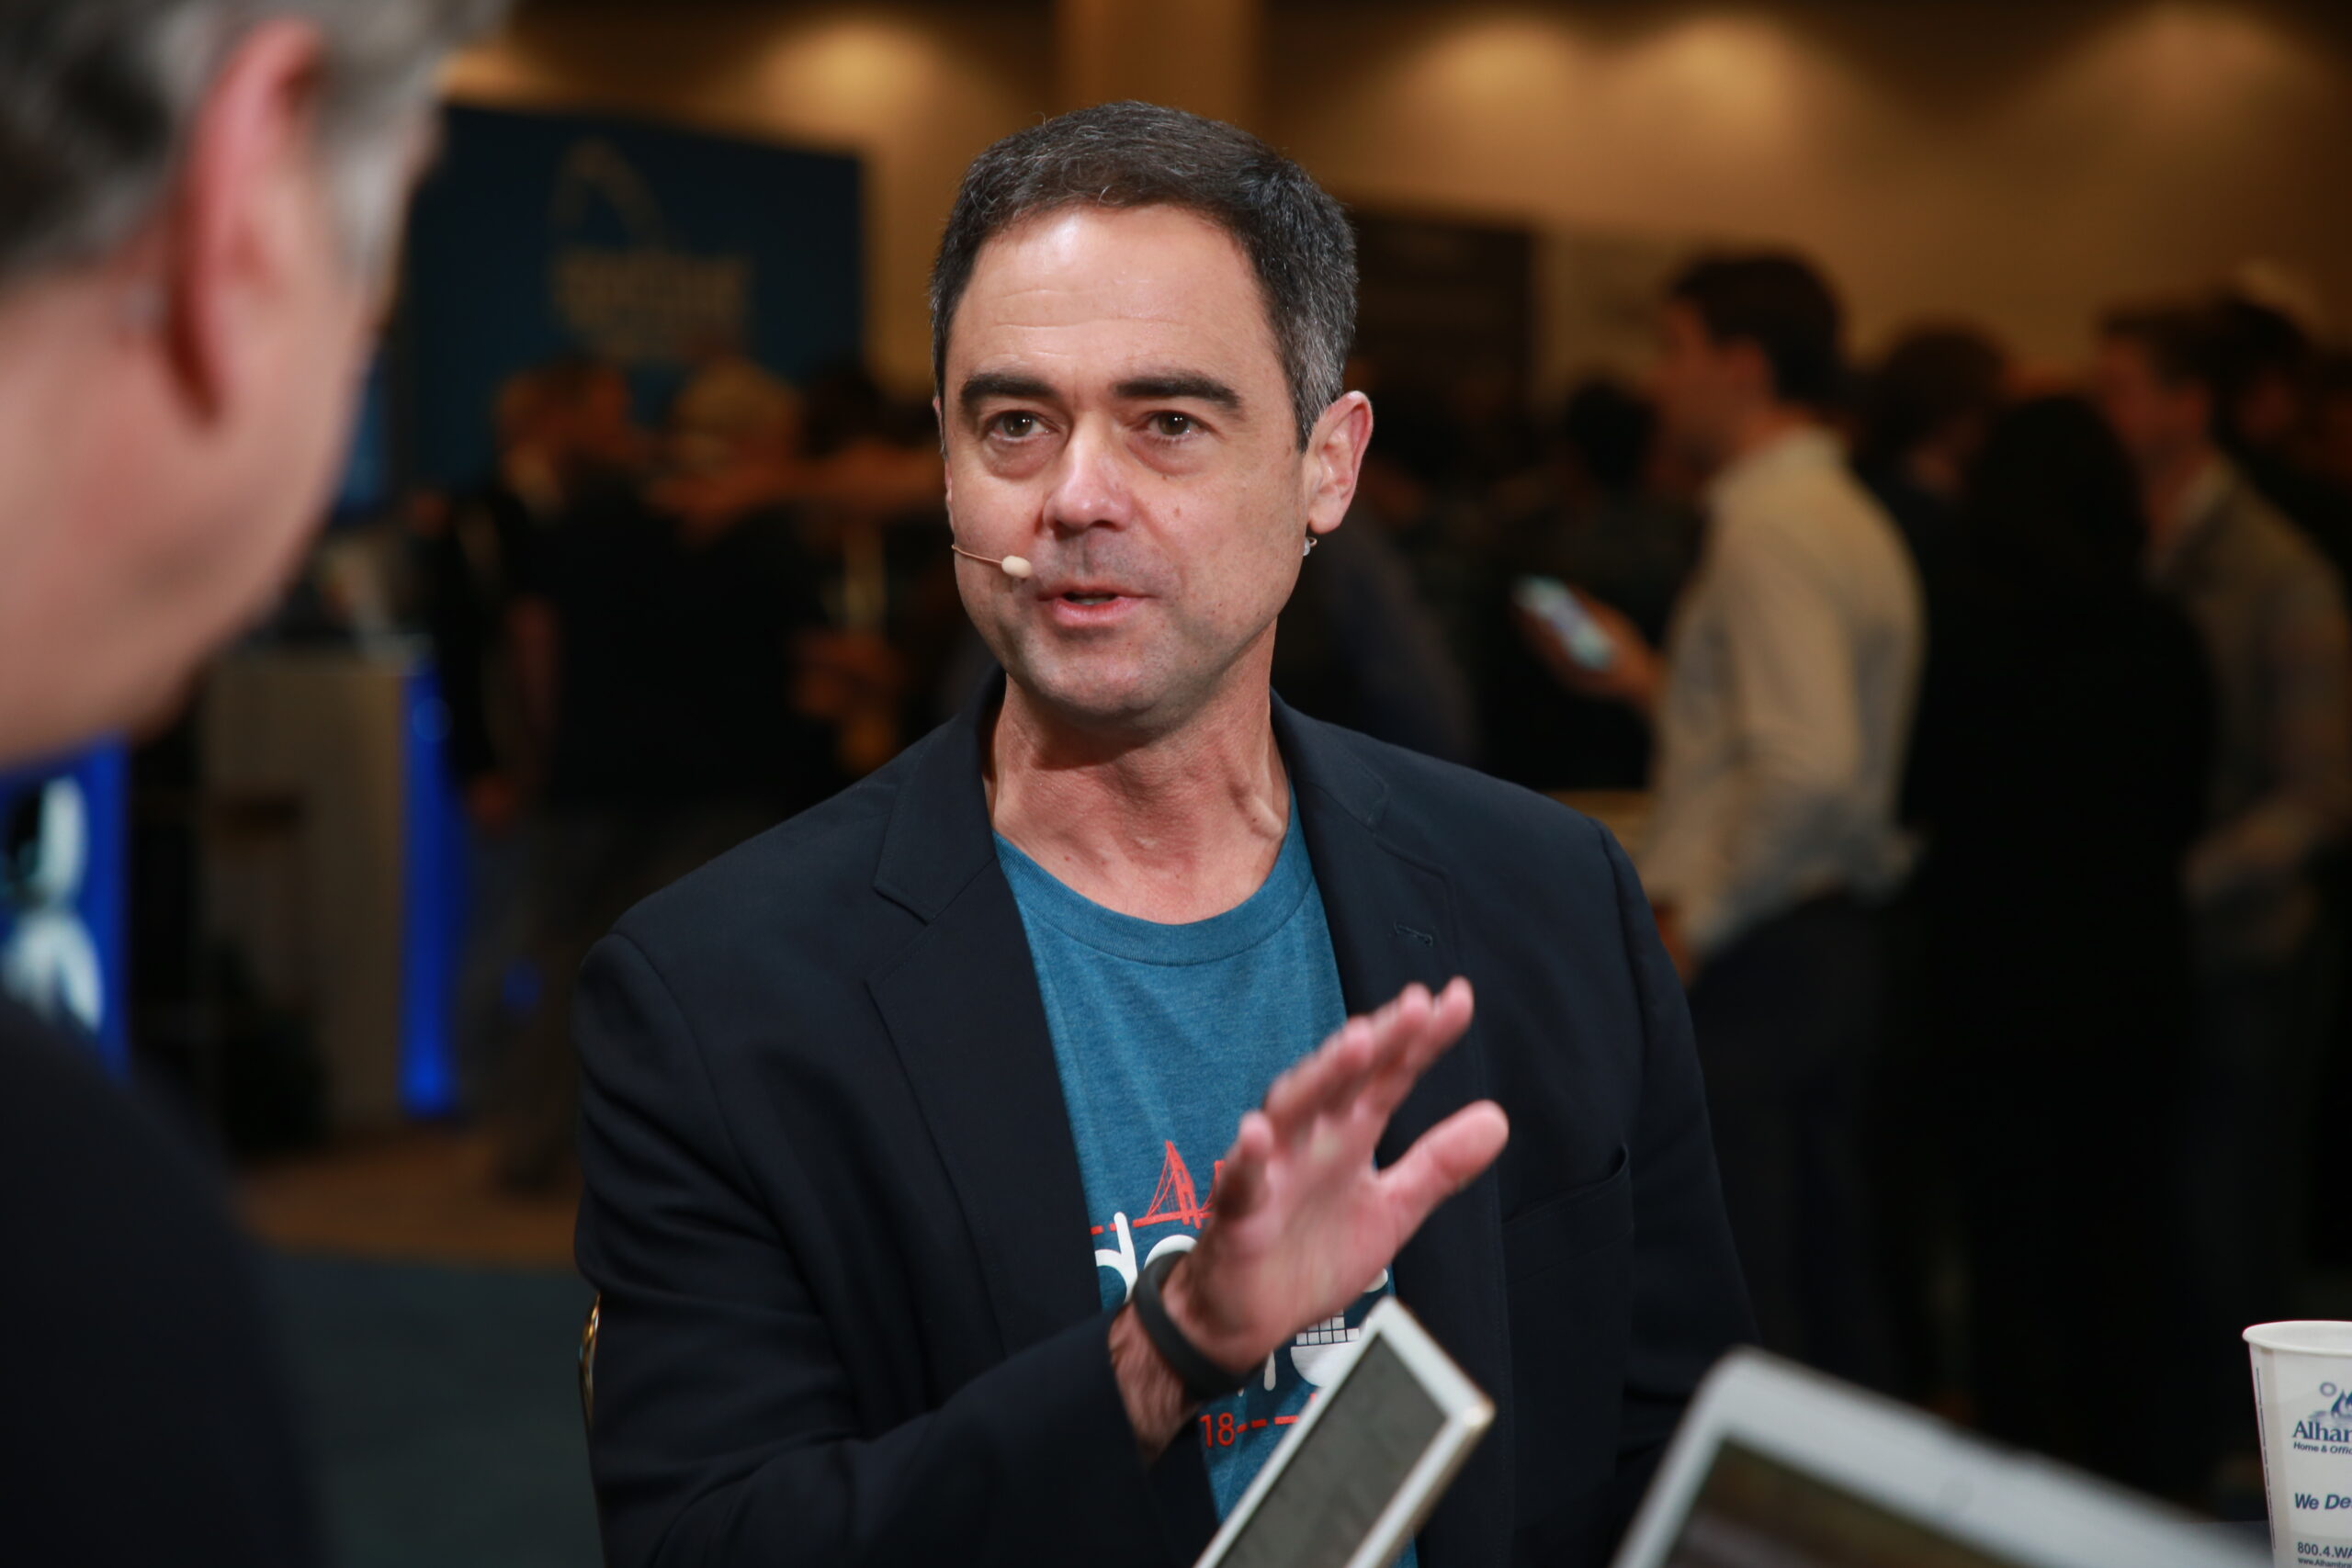 What to expect at DockerCon 2022: theCUBE livestream May 10